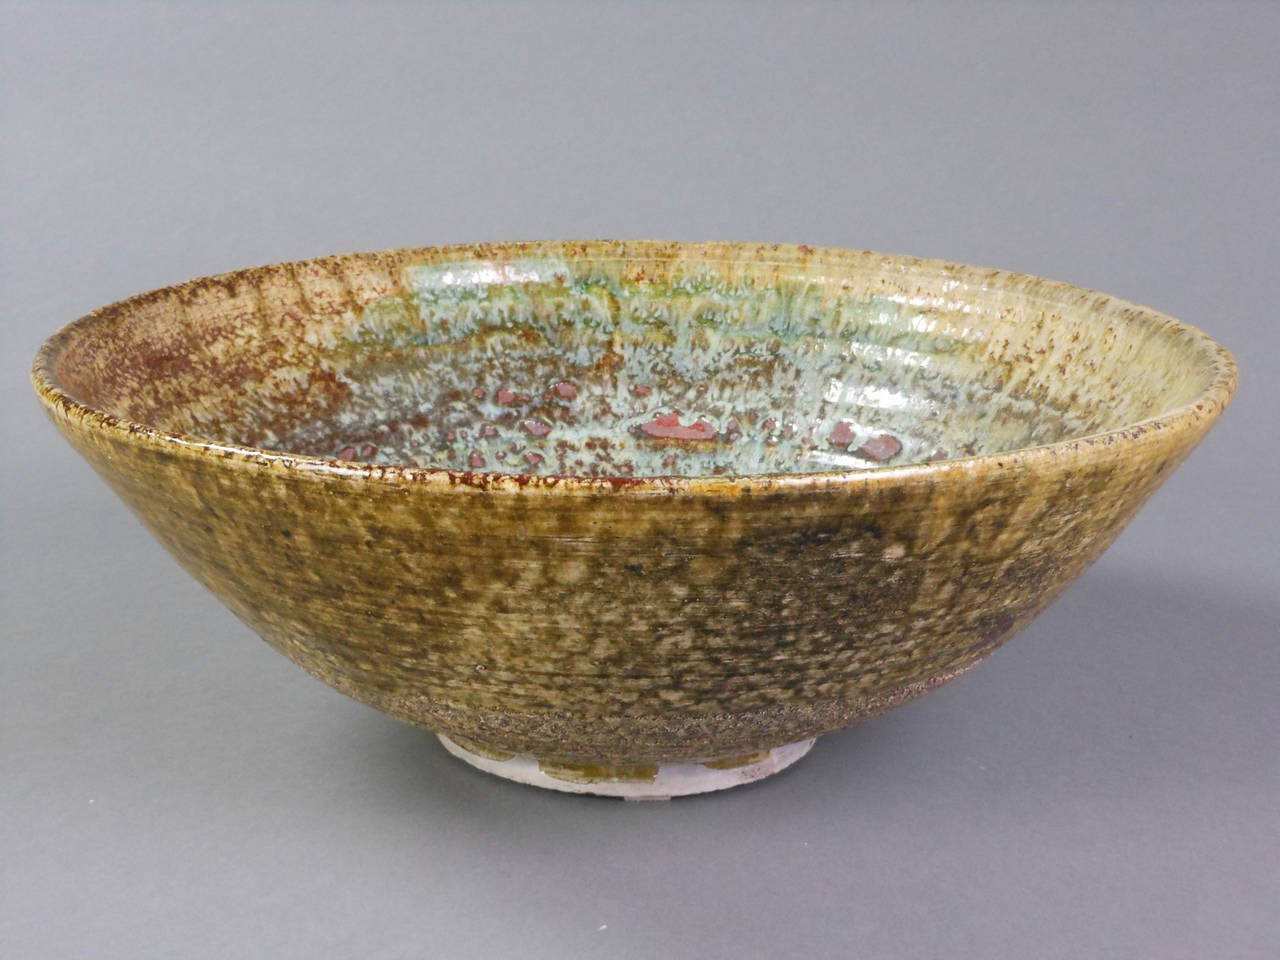 20th Century Mottled Brown and Green Glazed Stoneware Bowl